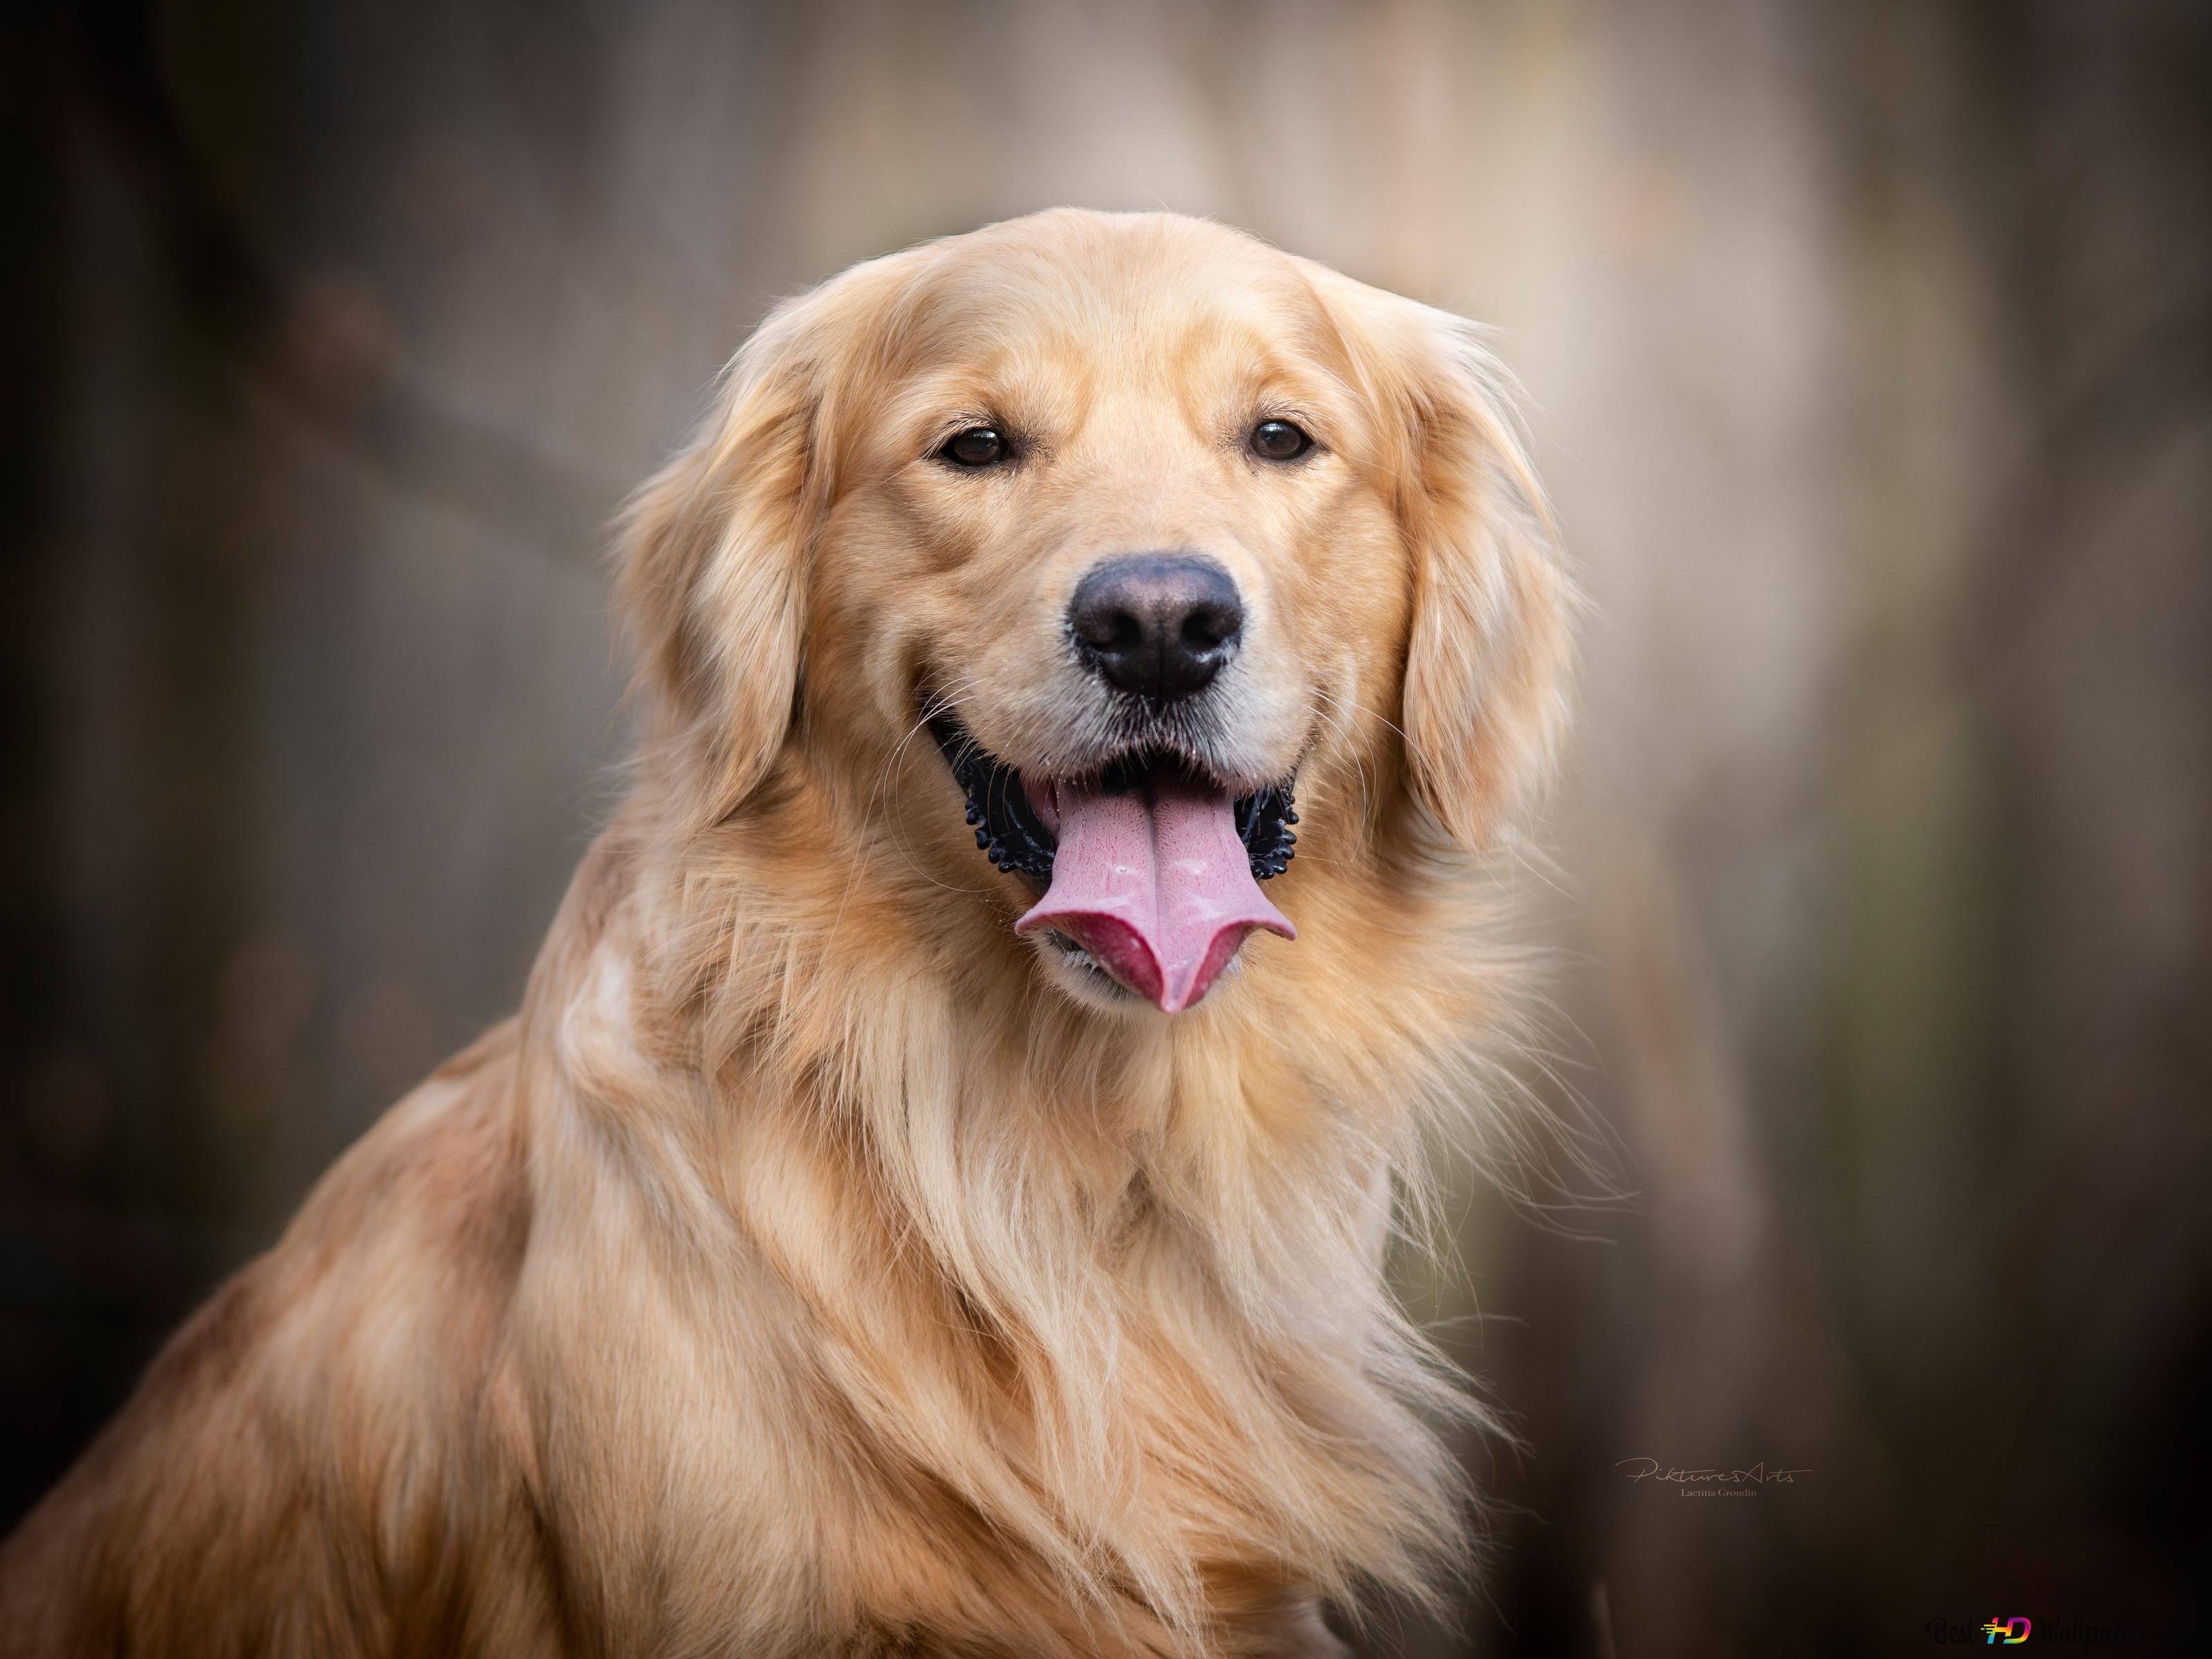 Cute dog golden retriever blurred in the foreground photo 4K wallpaper download